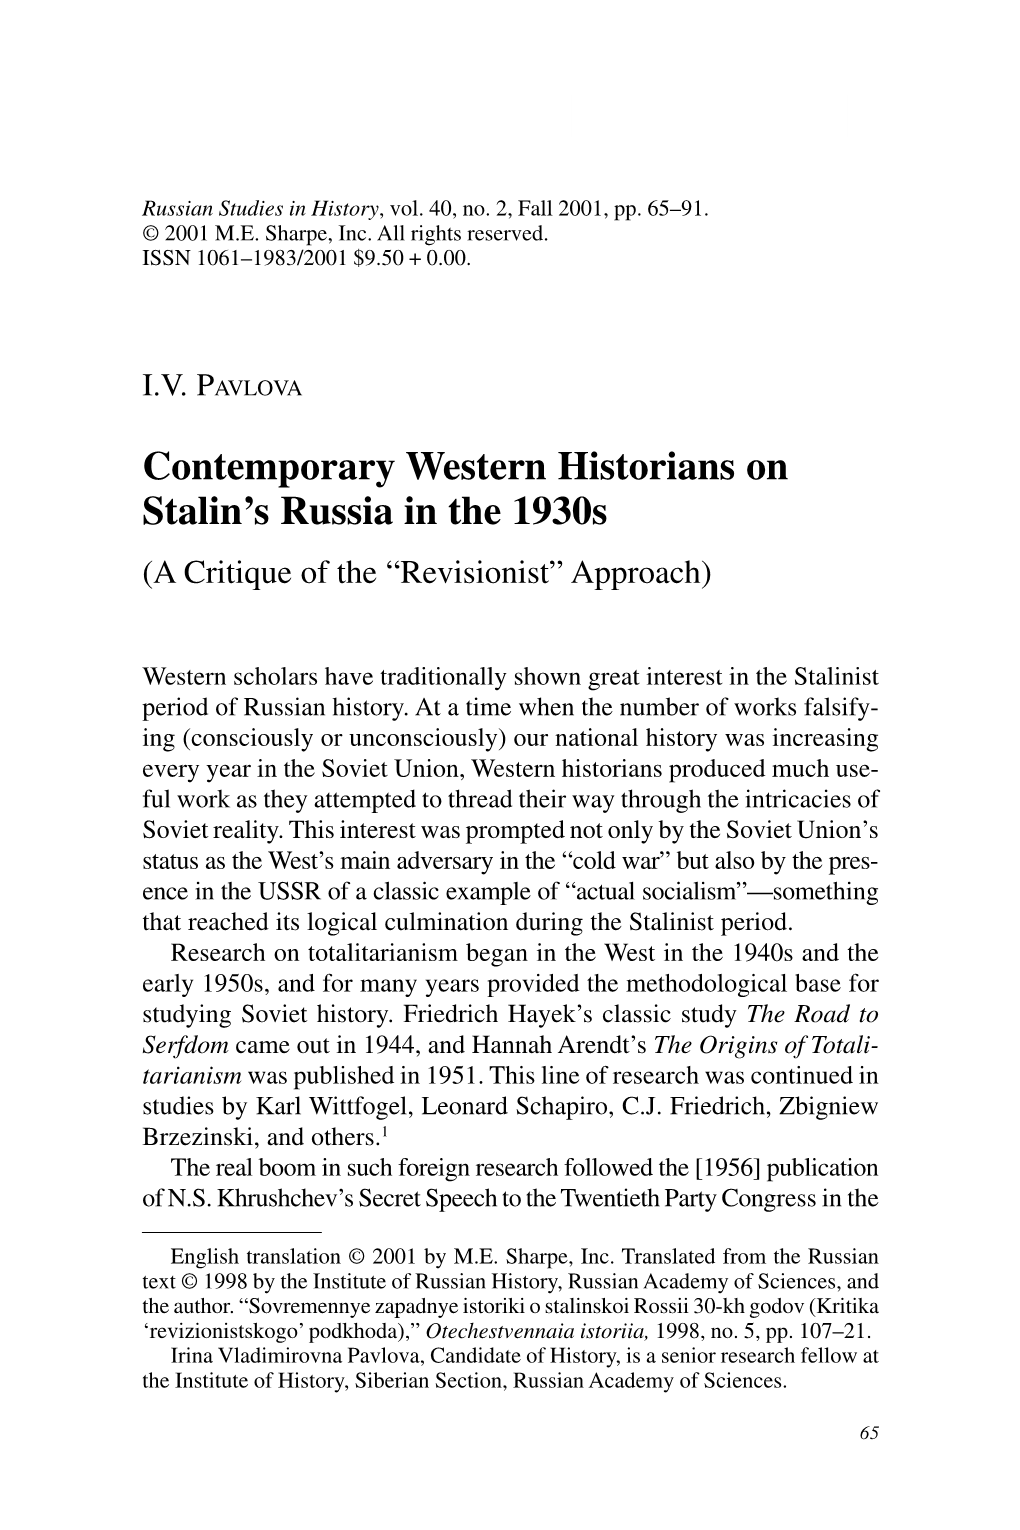 Contemporary Western Historians on Stalin's Russia in the 1930S